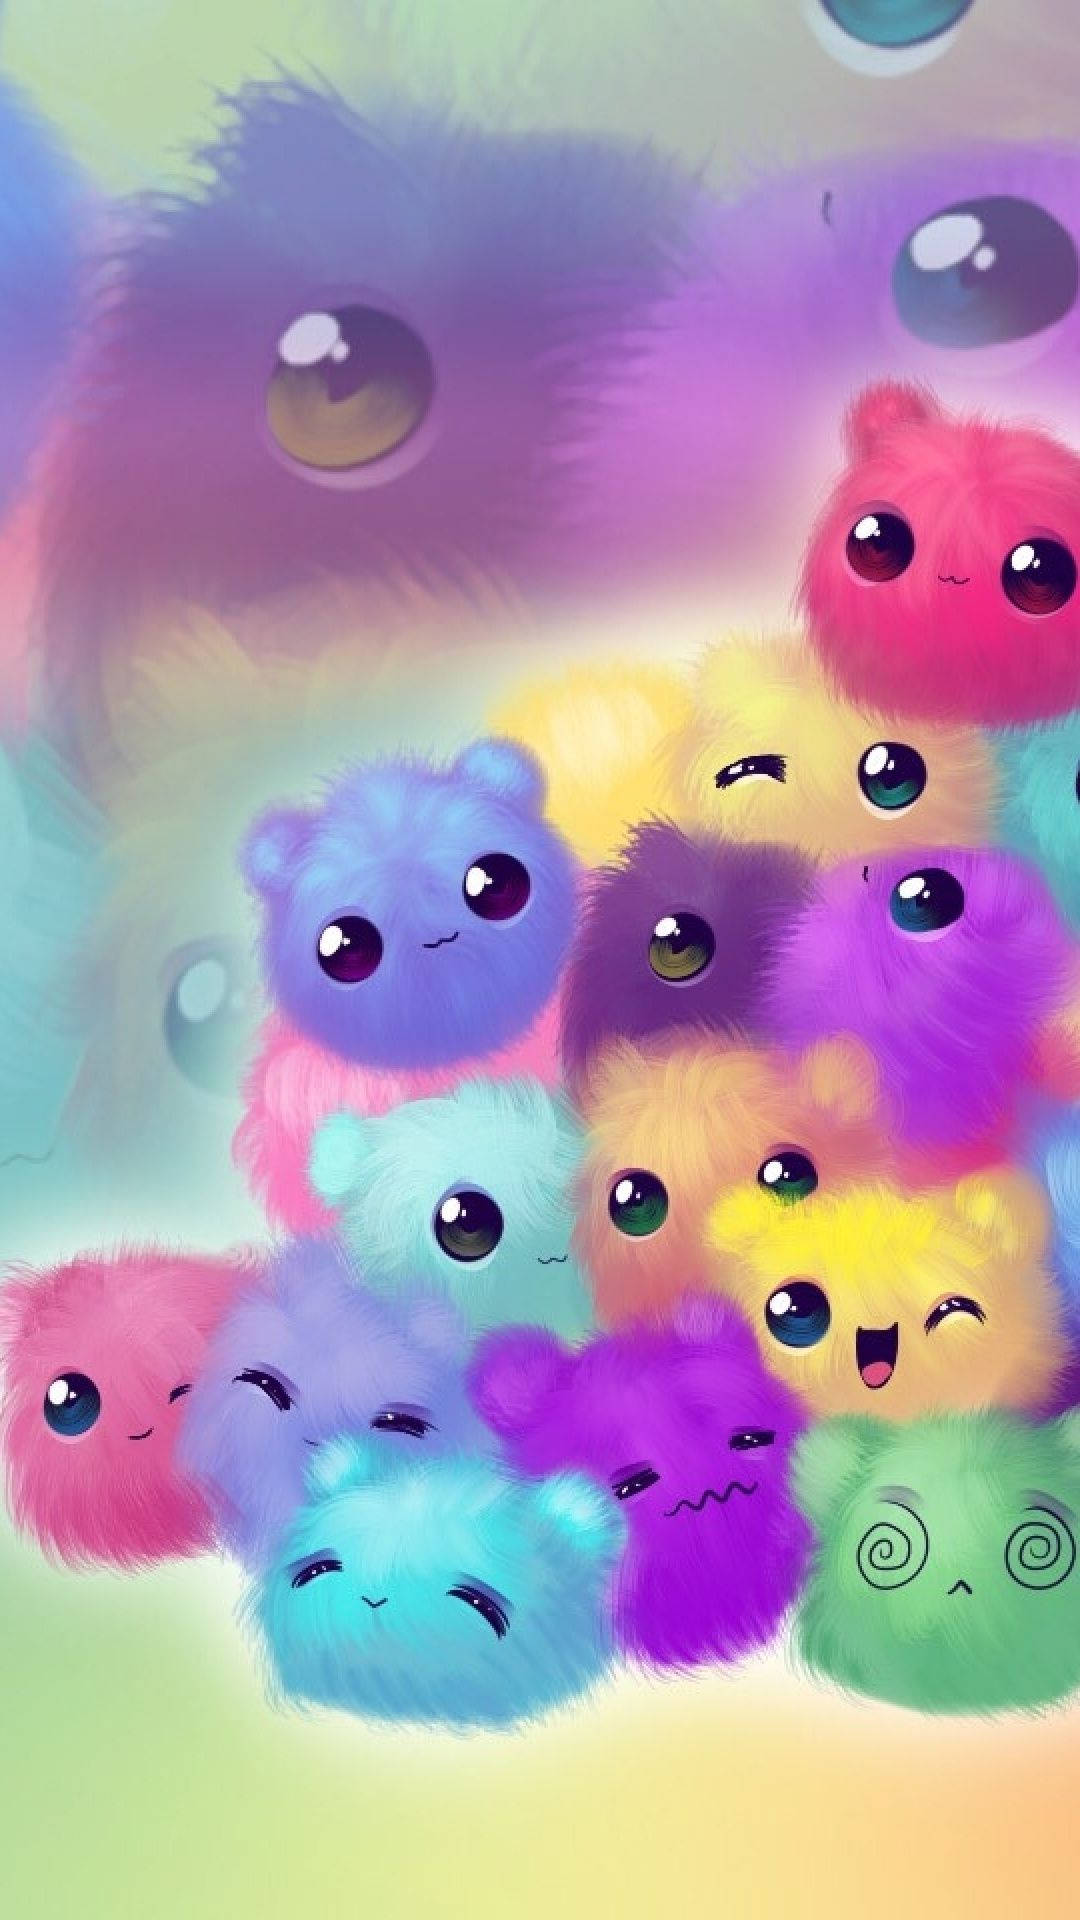 Digitally painted colorful cute fuzzy creatures wallpaper.